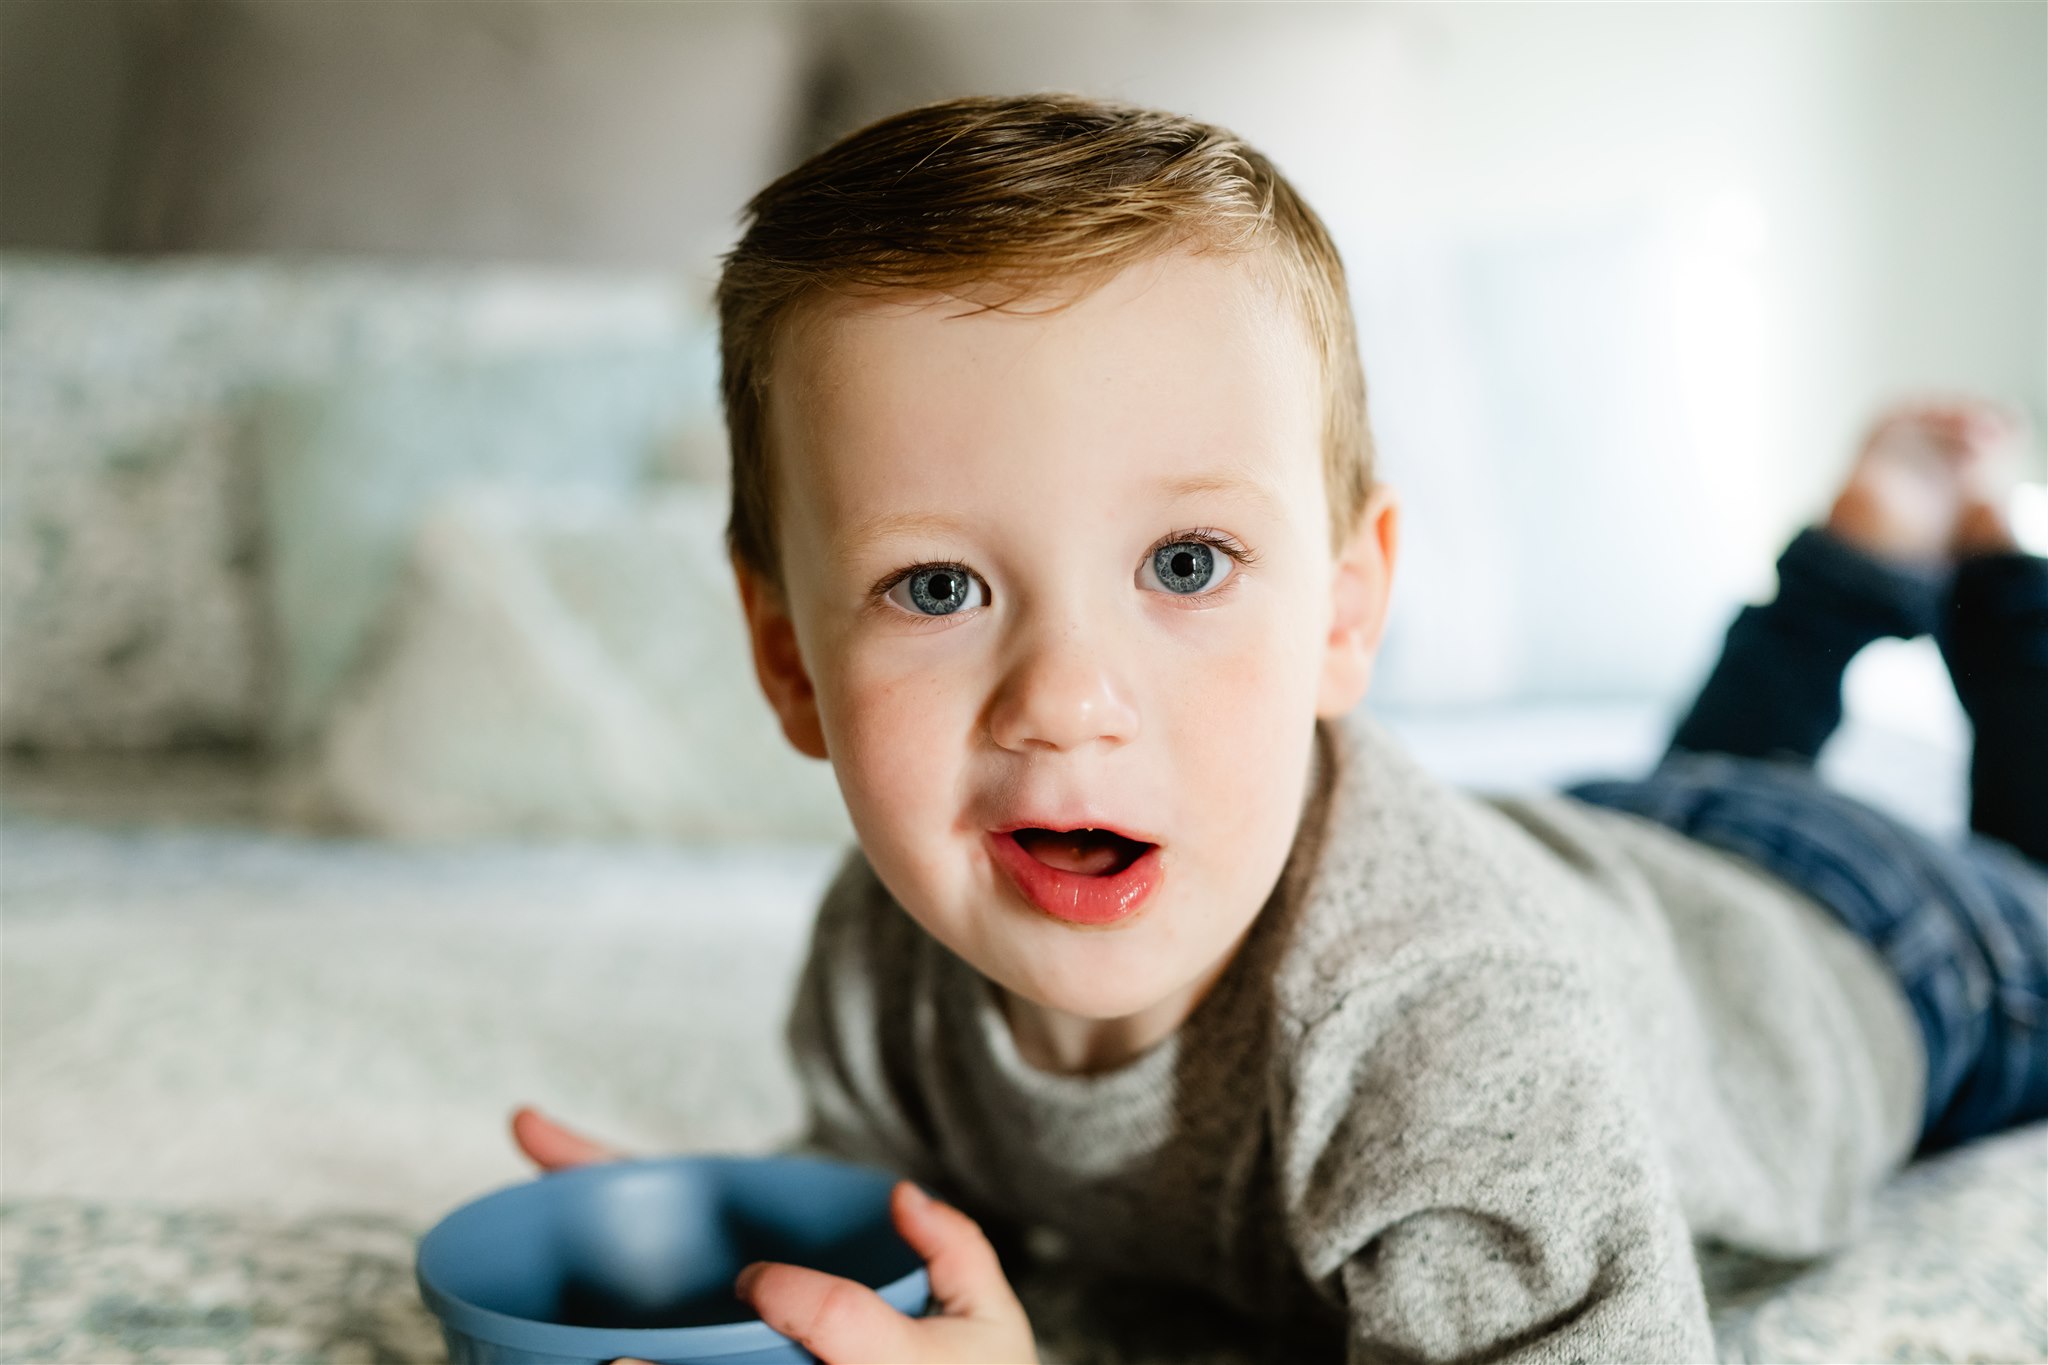 A toddler in a grey sweater lays on a bed eating a bowl of snacks